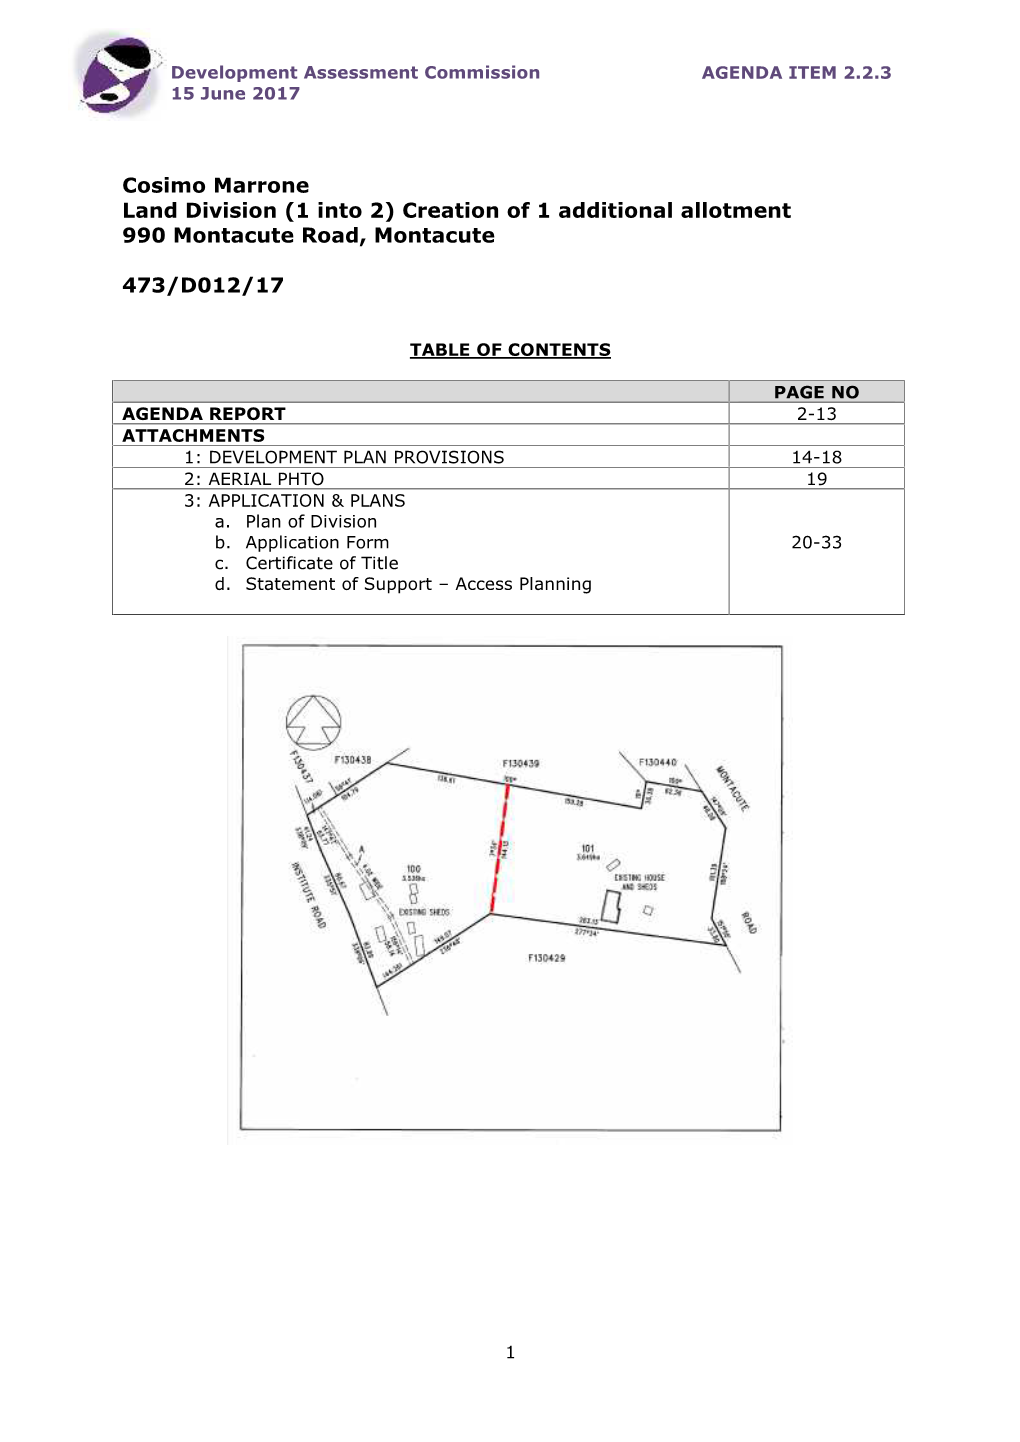 Cosimo Marrone Land Division (1 Into 2) Creation of 1 Additional Allotment 990 Montacute Road, Montacute